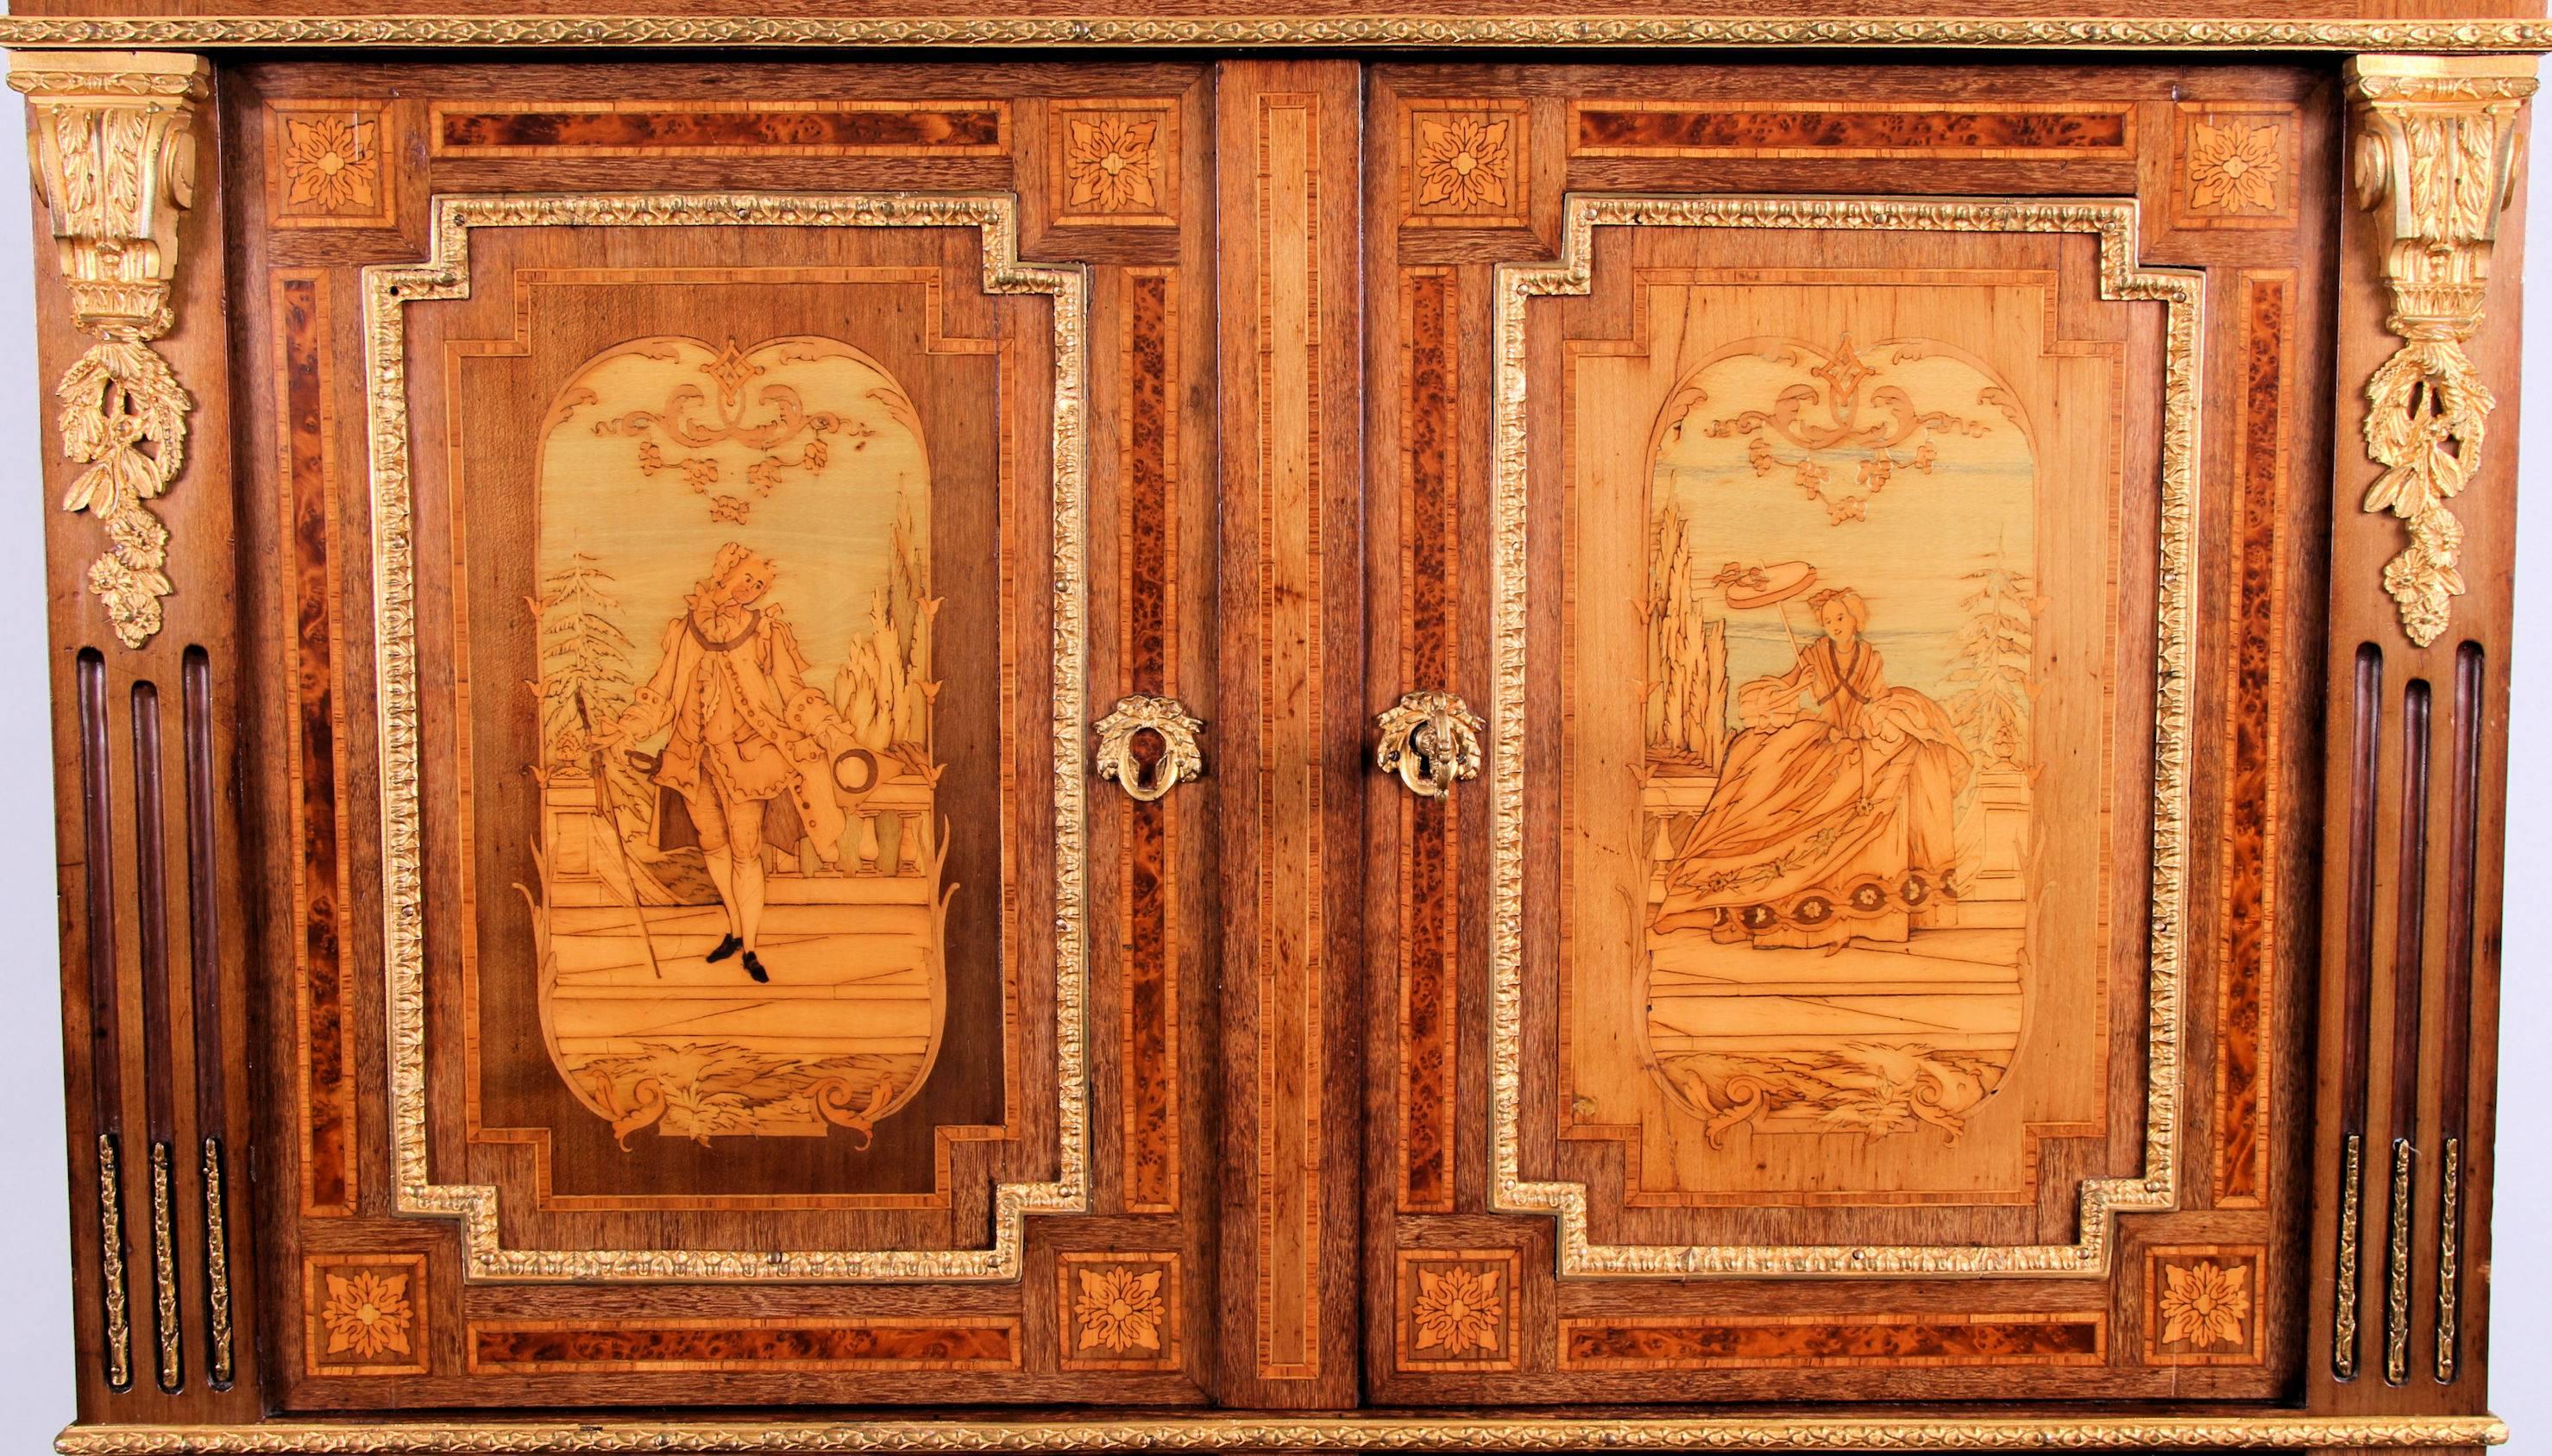 Highly important and palatial Napoleon III Louis XV Revival Ormolu-Mounted Marquetry Bonheur Du Jour by Charles Guillaume Diehl, Designed by Jean Brandely, The Marquetry by E. Varlot, Paris. The rarity & importance of this magnificent piece